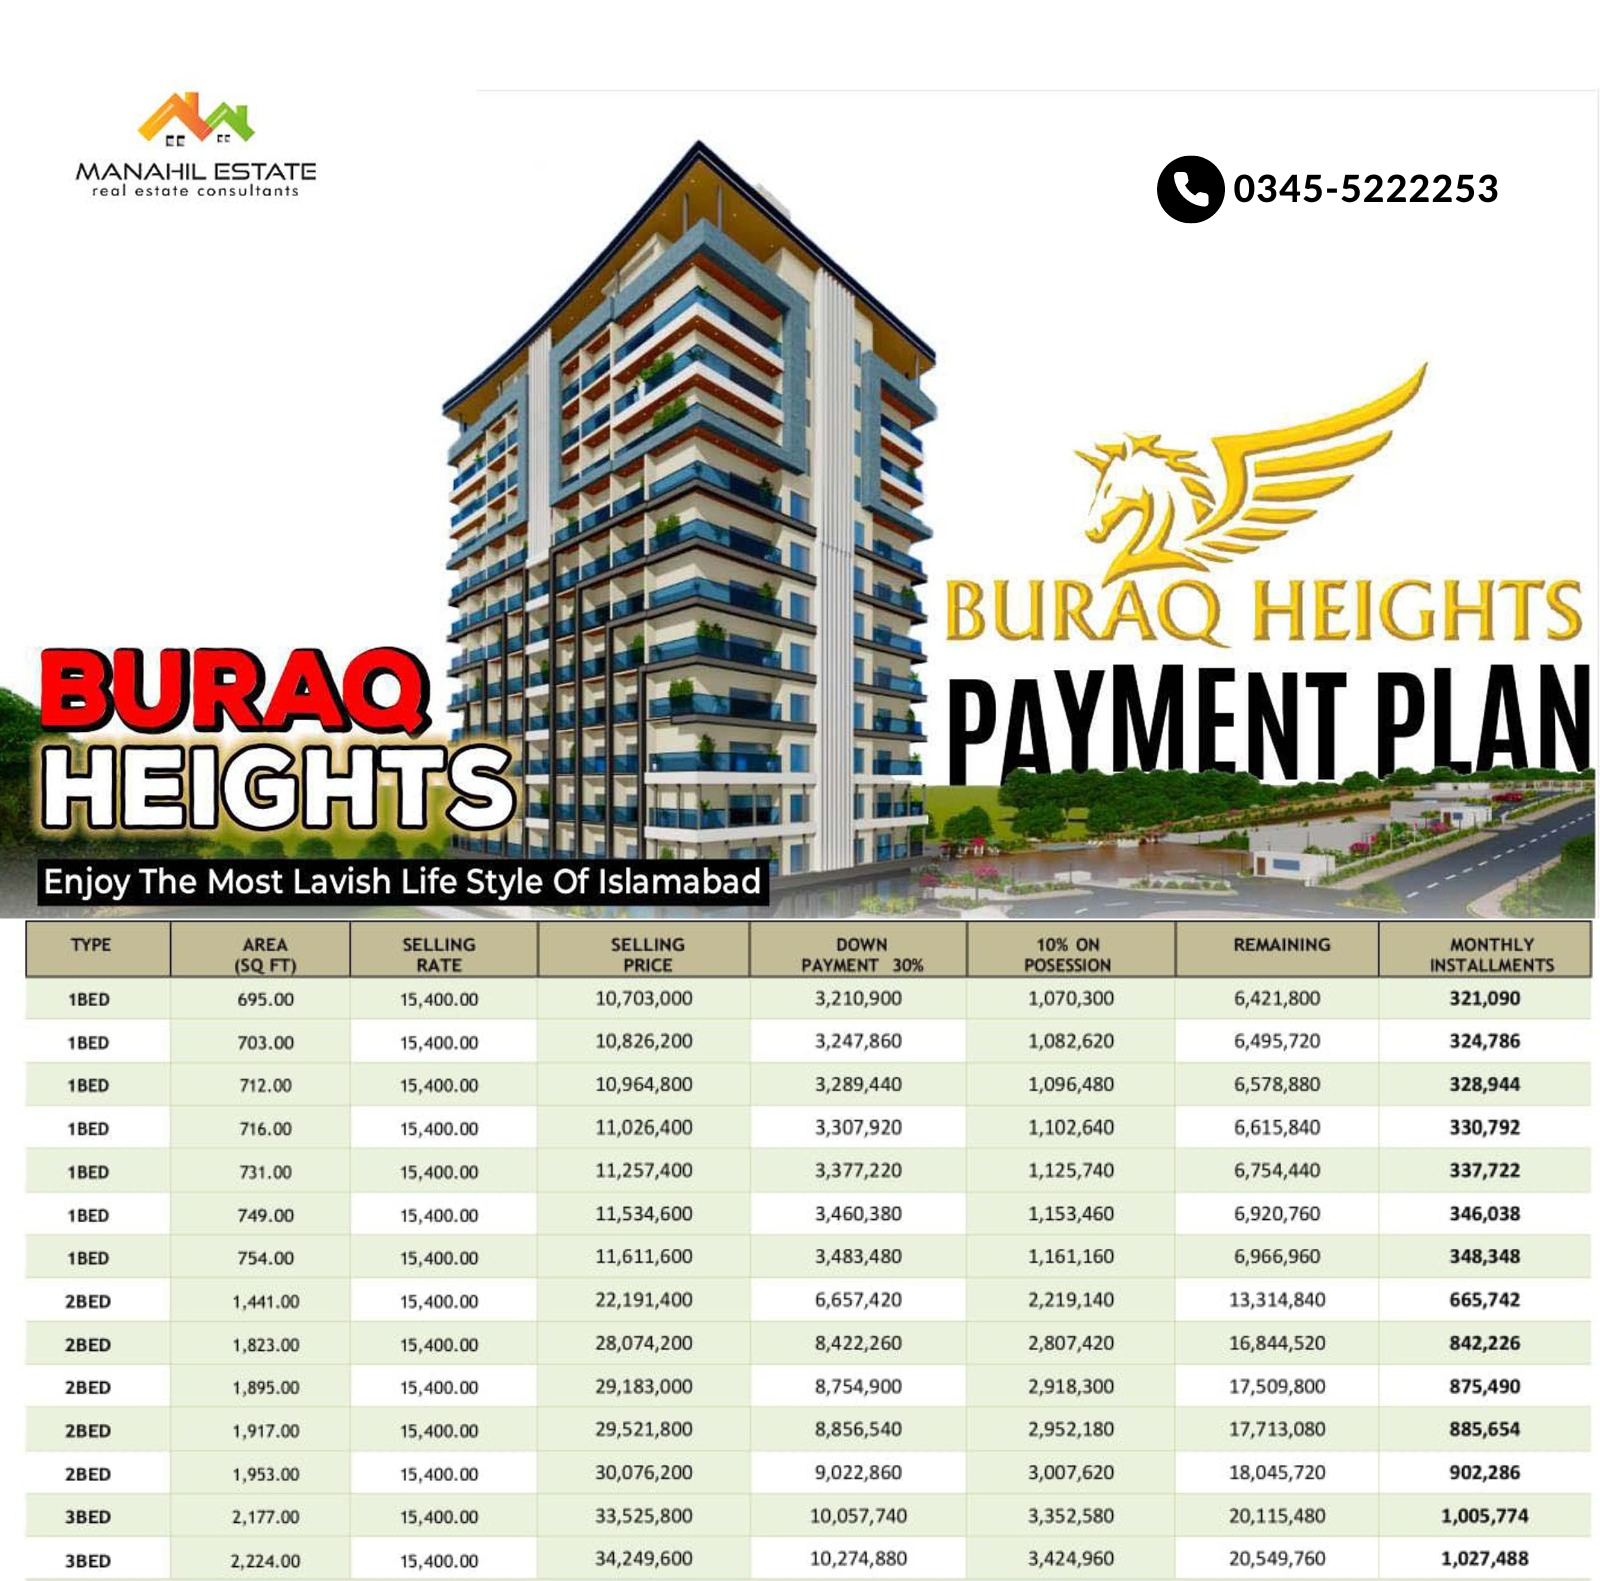 Buraq Heights Payment Plan Residential 